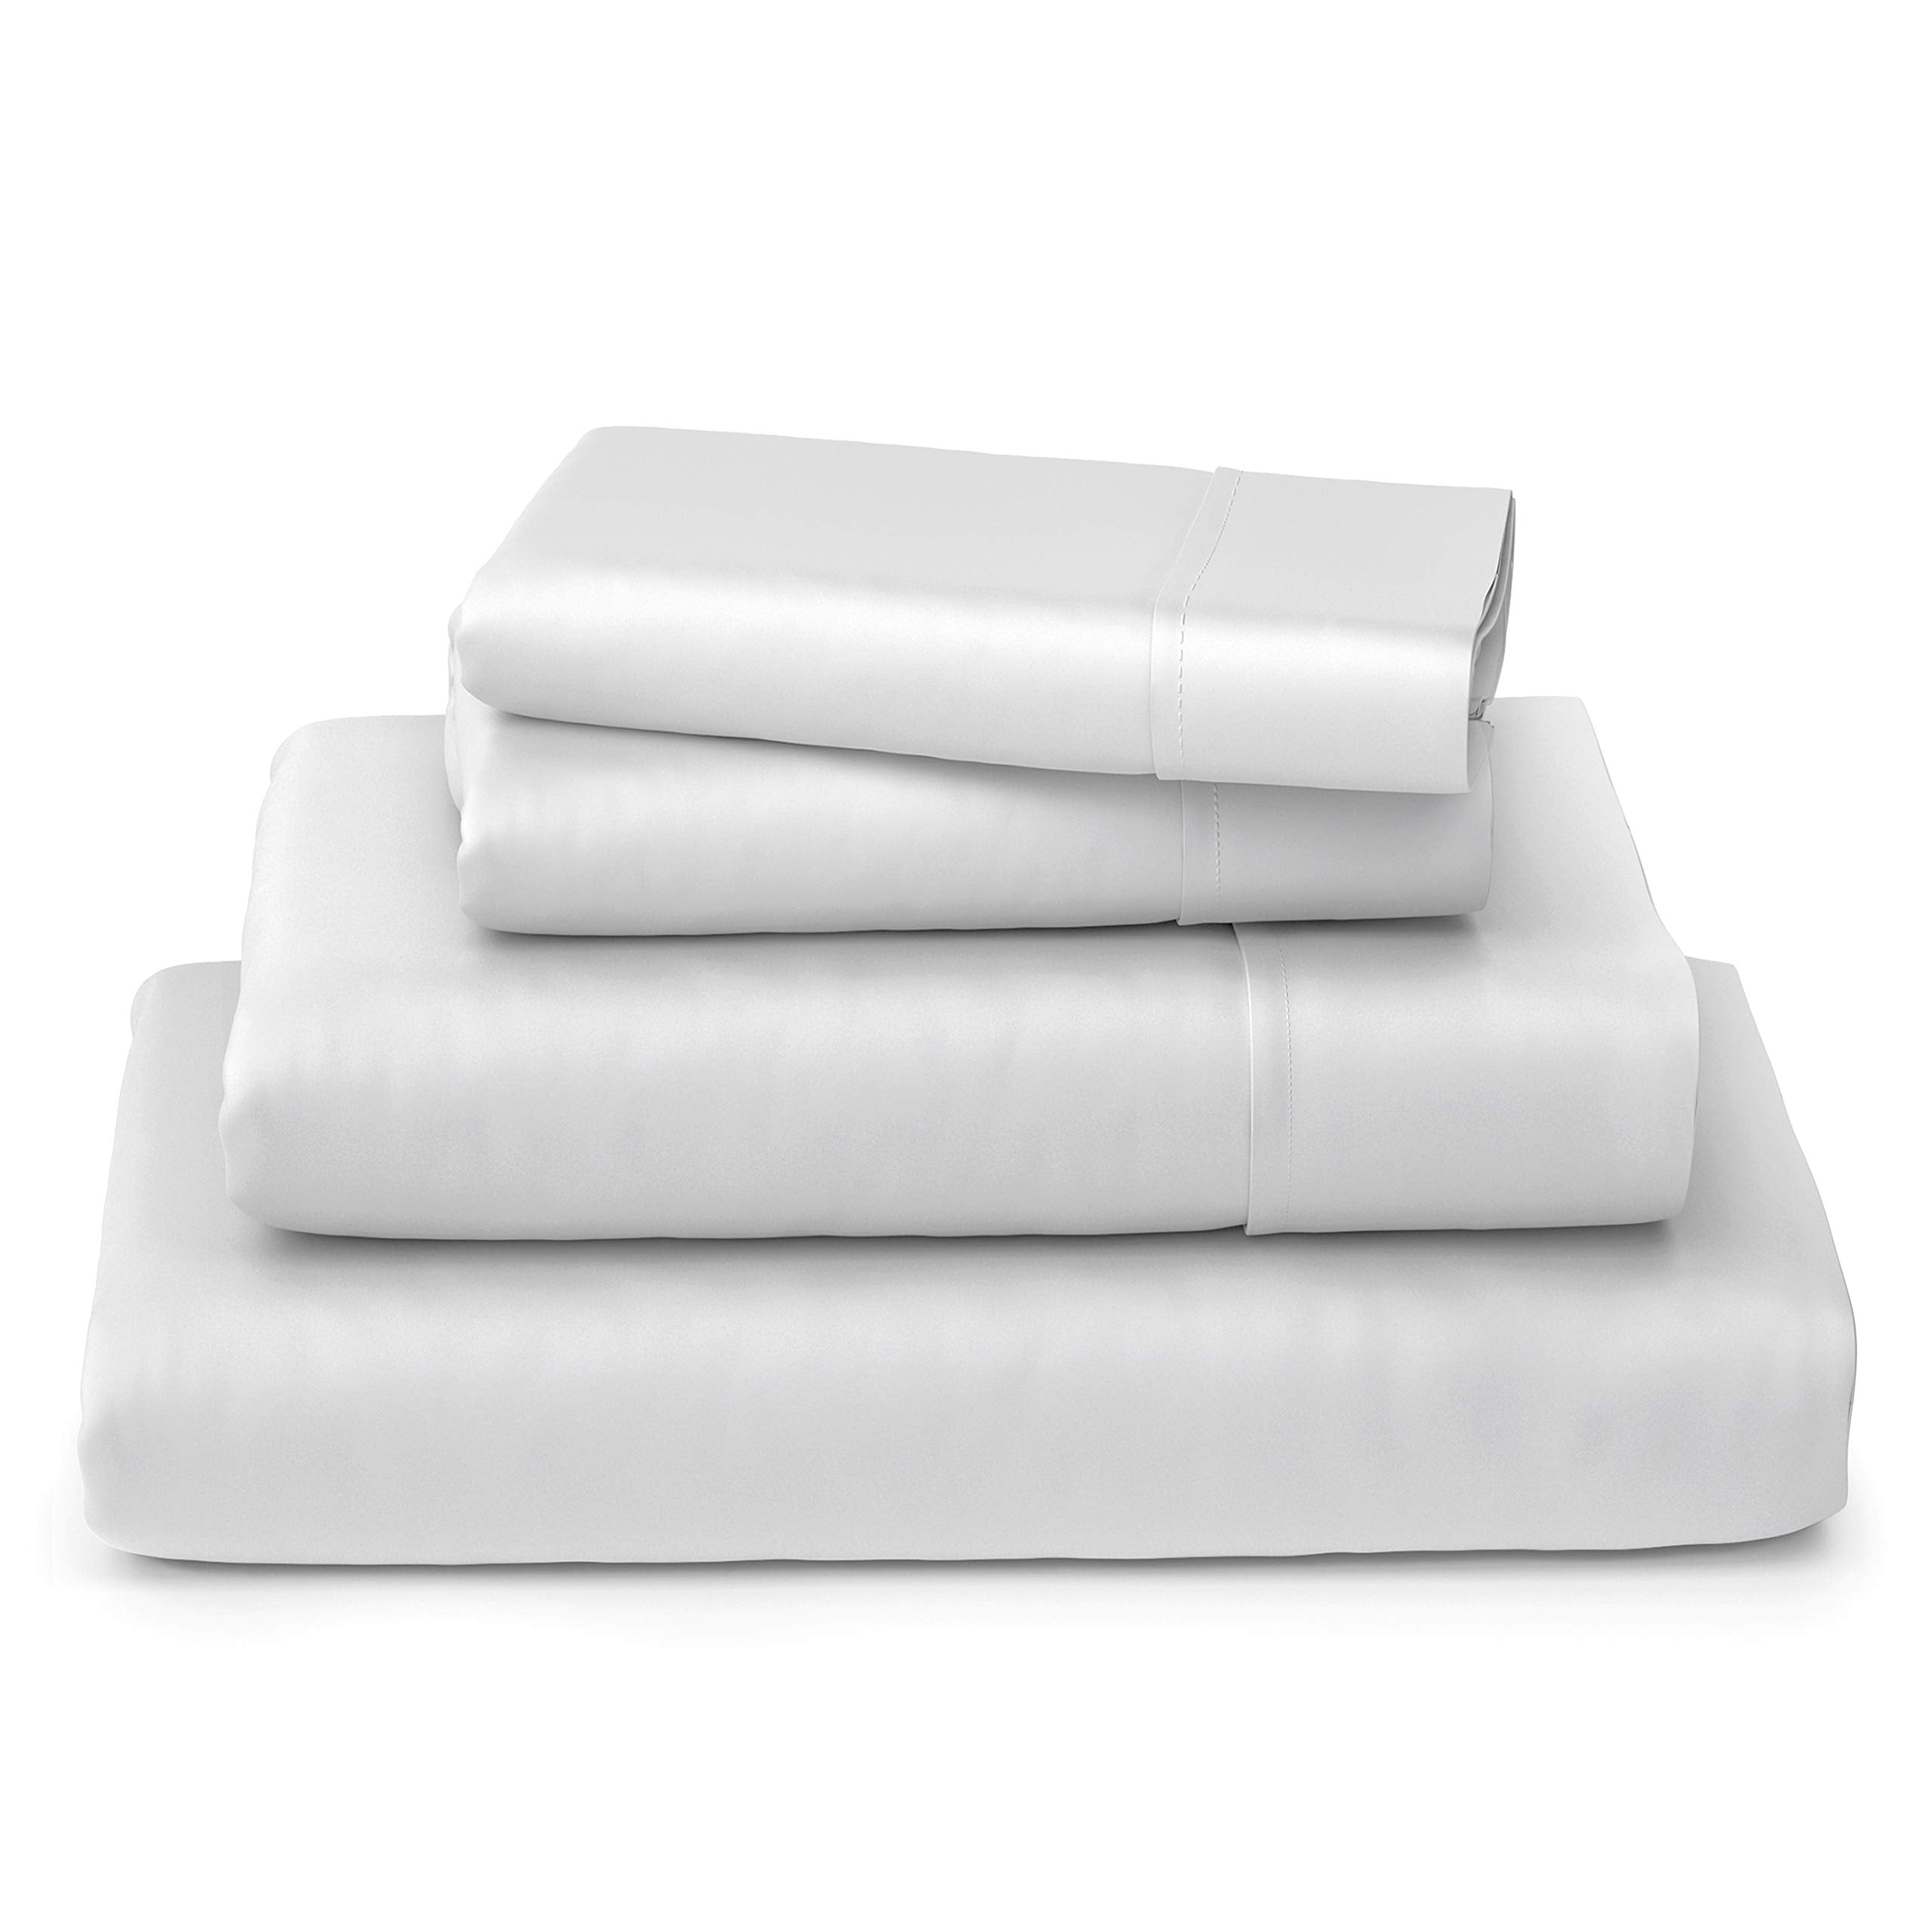 Cosy House Collection Luxury Bamboo Sheets - 4 Piece Bedding Set - Bamboo Viscose Blend - Soft, Breathable, Deep Pocket - 1 Duvet Cover, 1 Fitted Sheet, 2 Pillow Cases - King, White